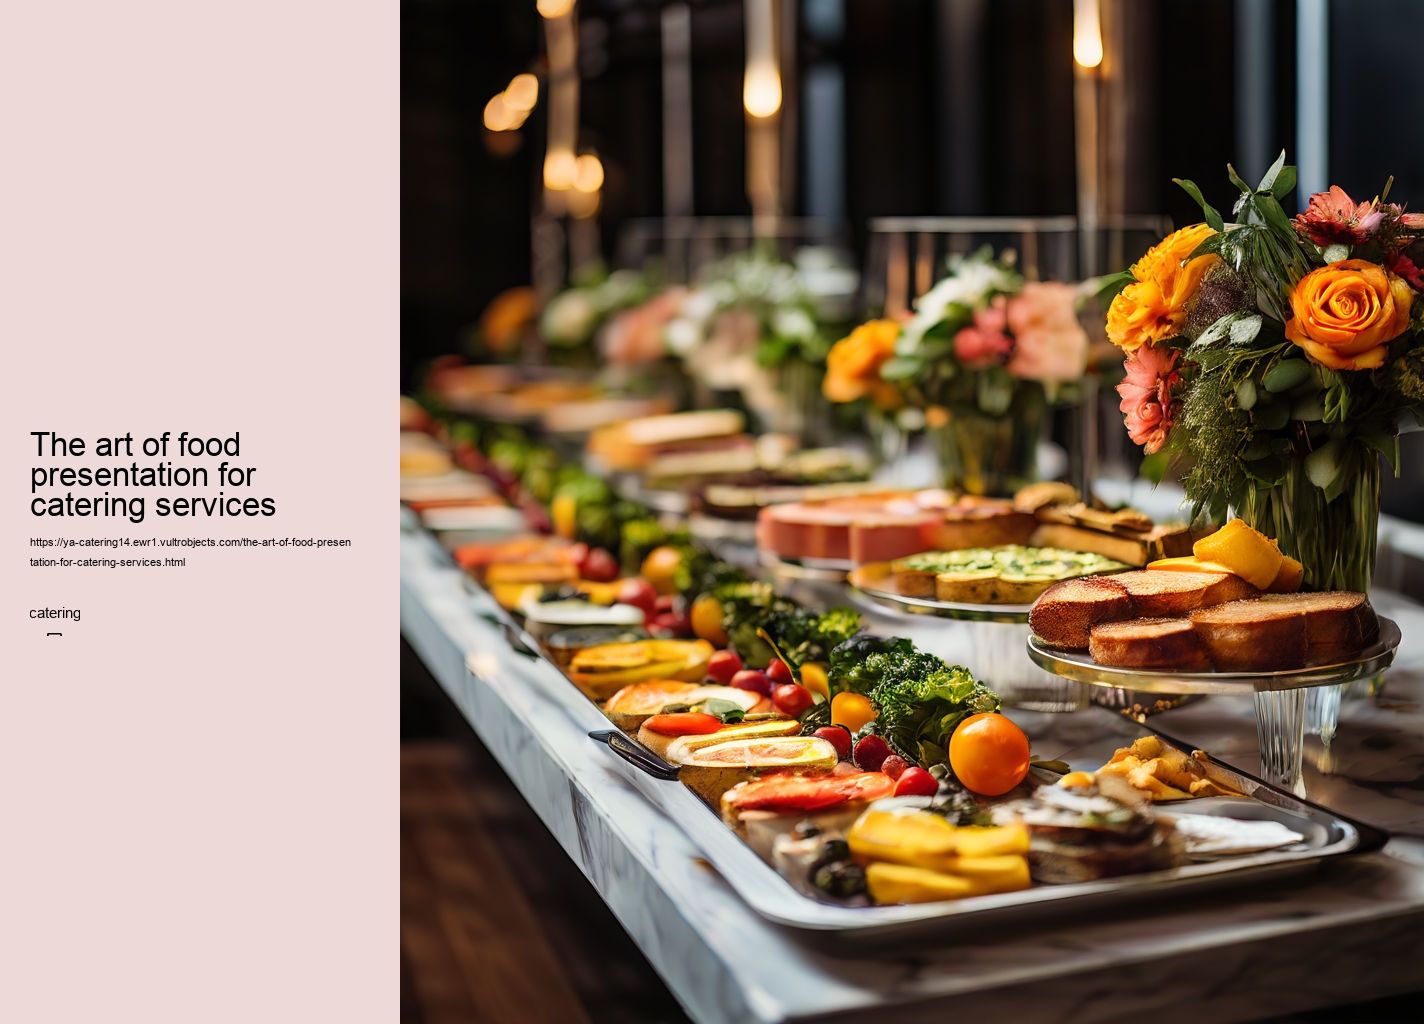 The art of food presentation for catering services